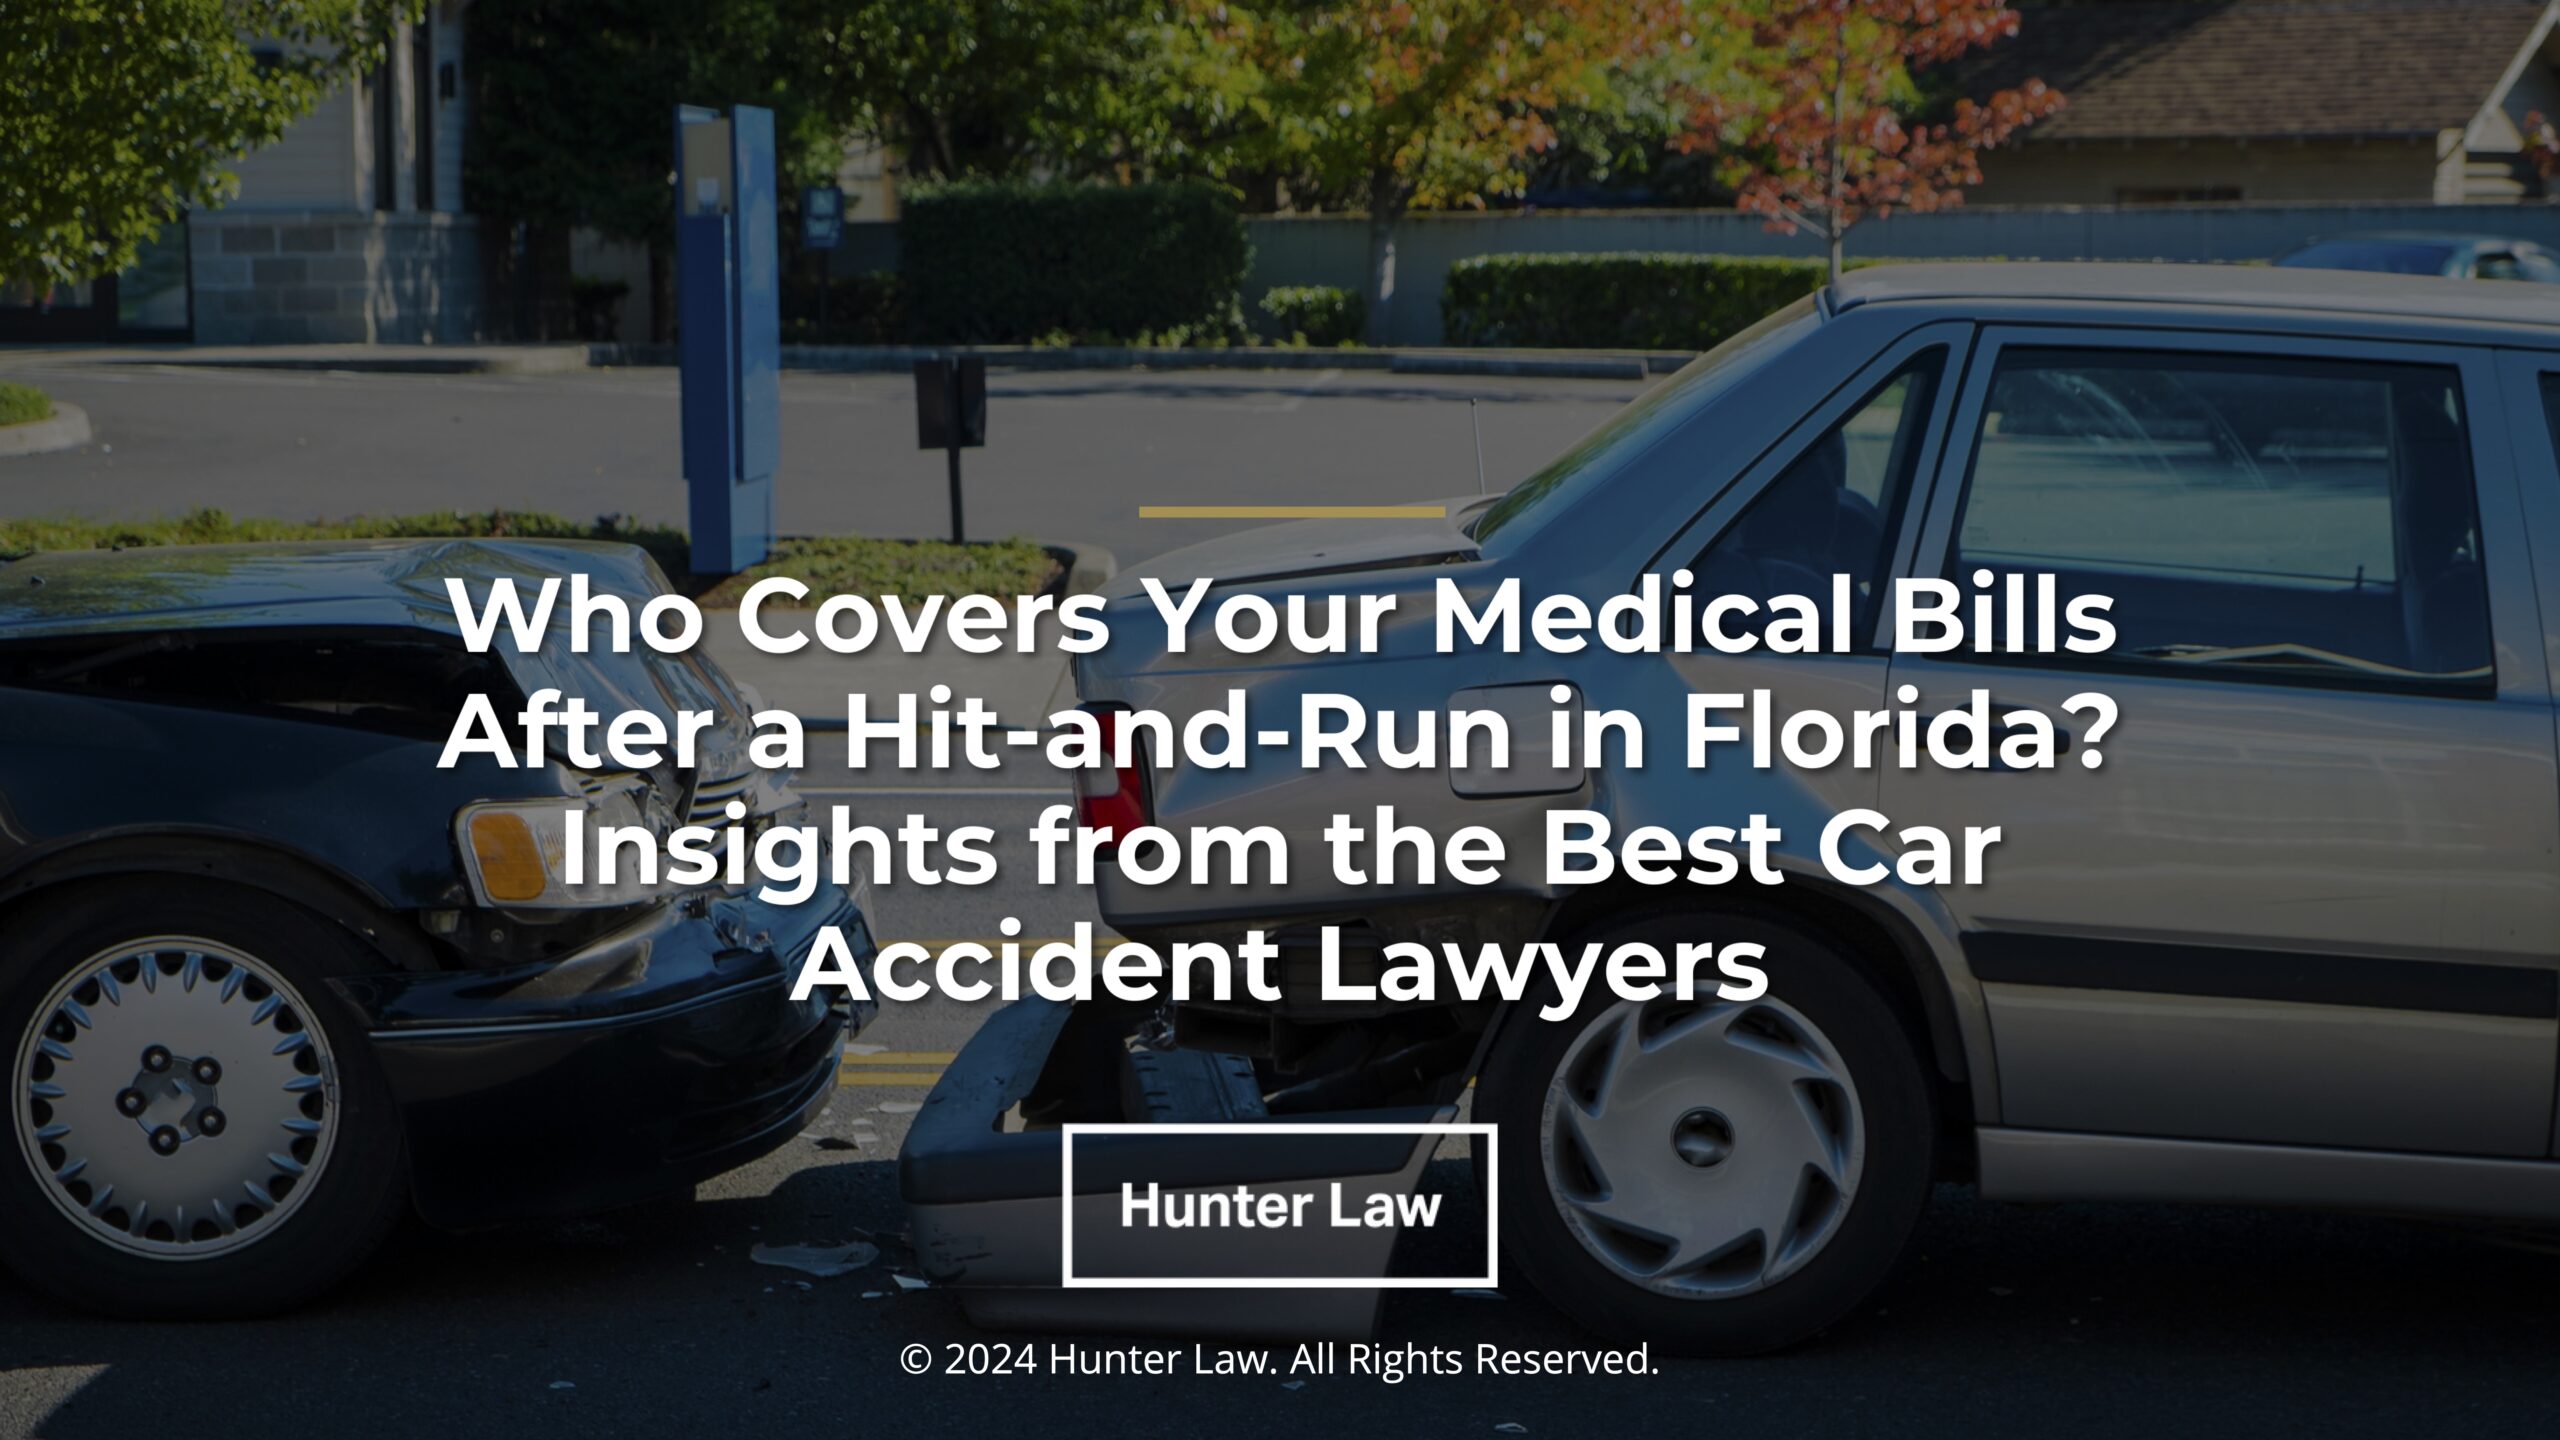 Featured: Auto accident with two cars on city street- who covers your medical bills after a hit-and-run in Florida? Insights from the best car accident lawyers